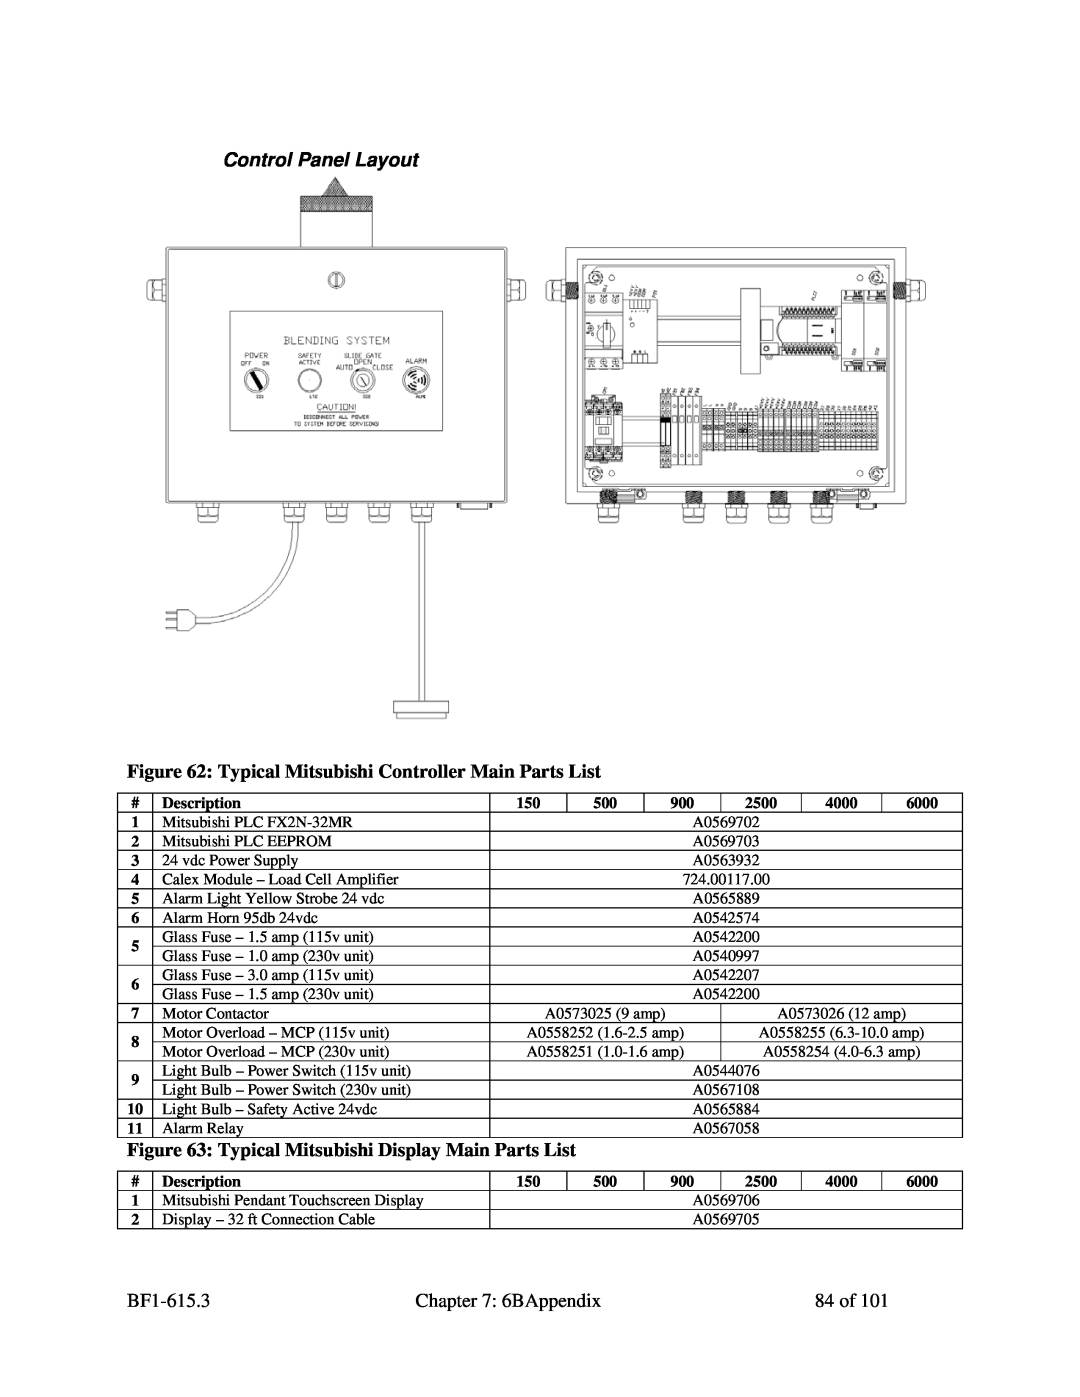 Mitsubishi Electronics 882.00273.00 specifications Control Panel Layout, Typical Mitsubishi Controller Main Parts List 